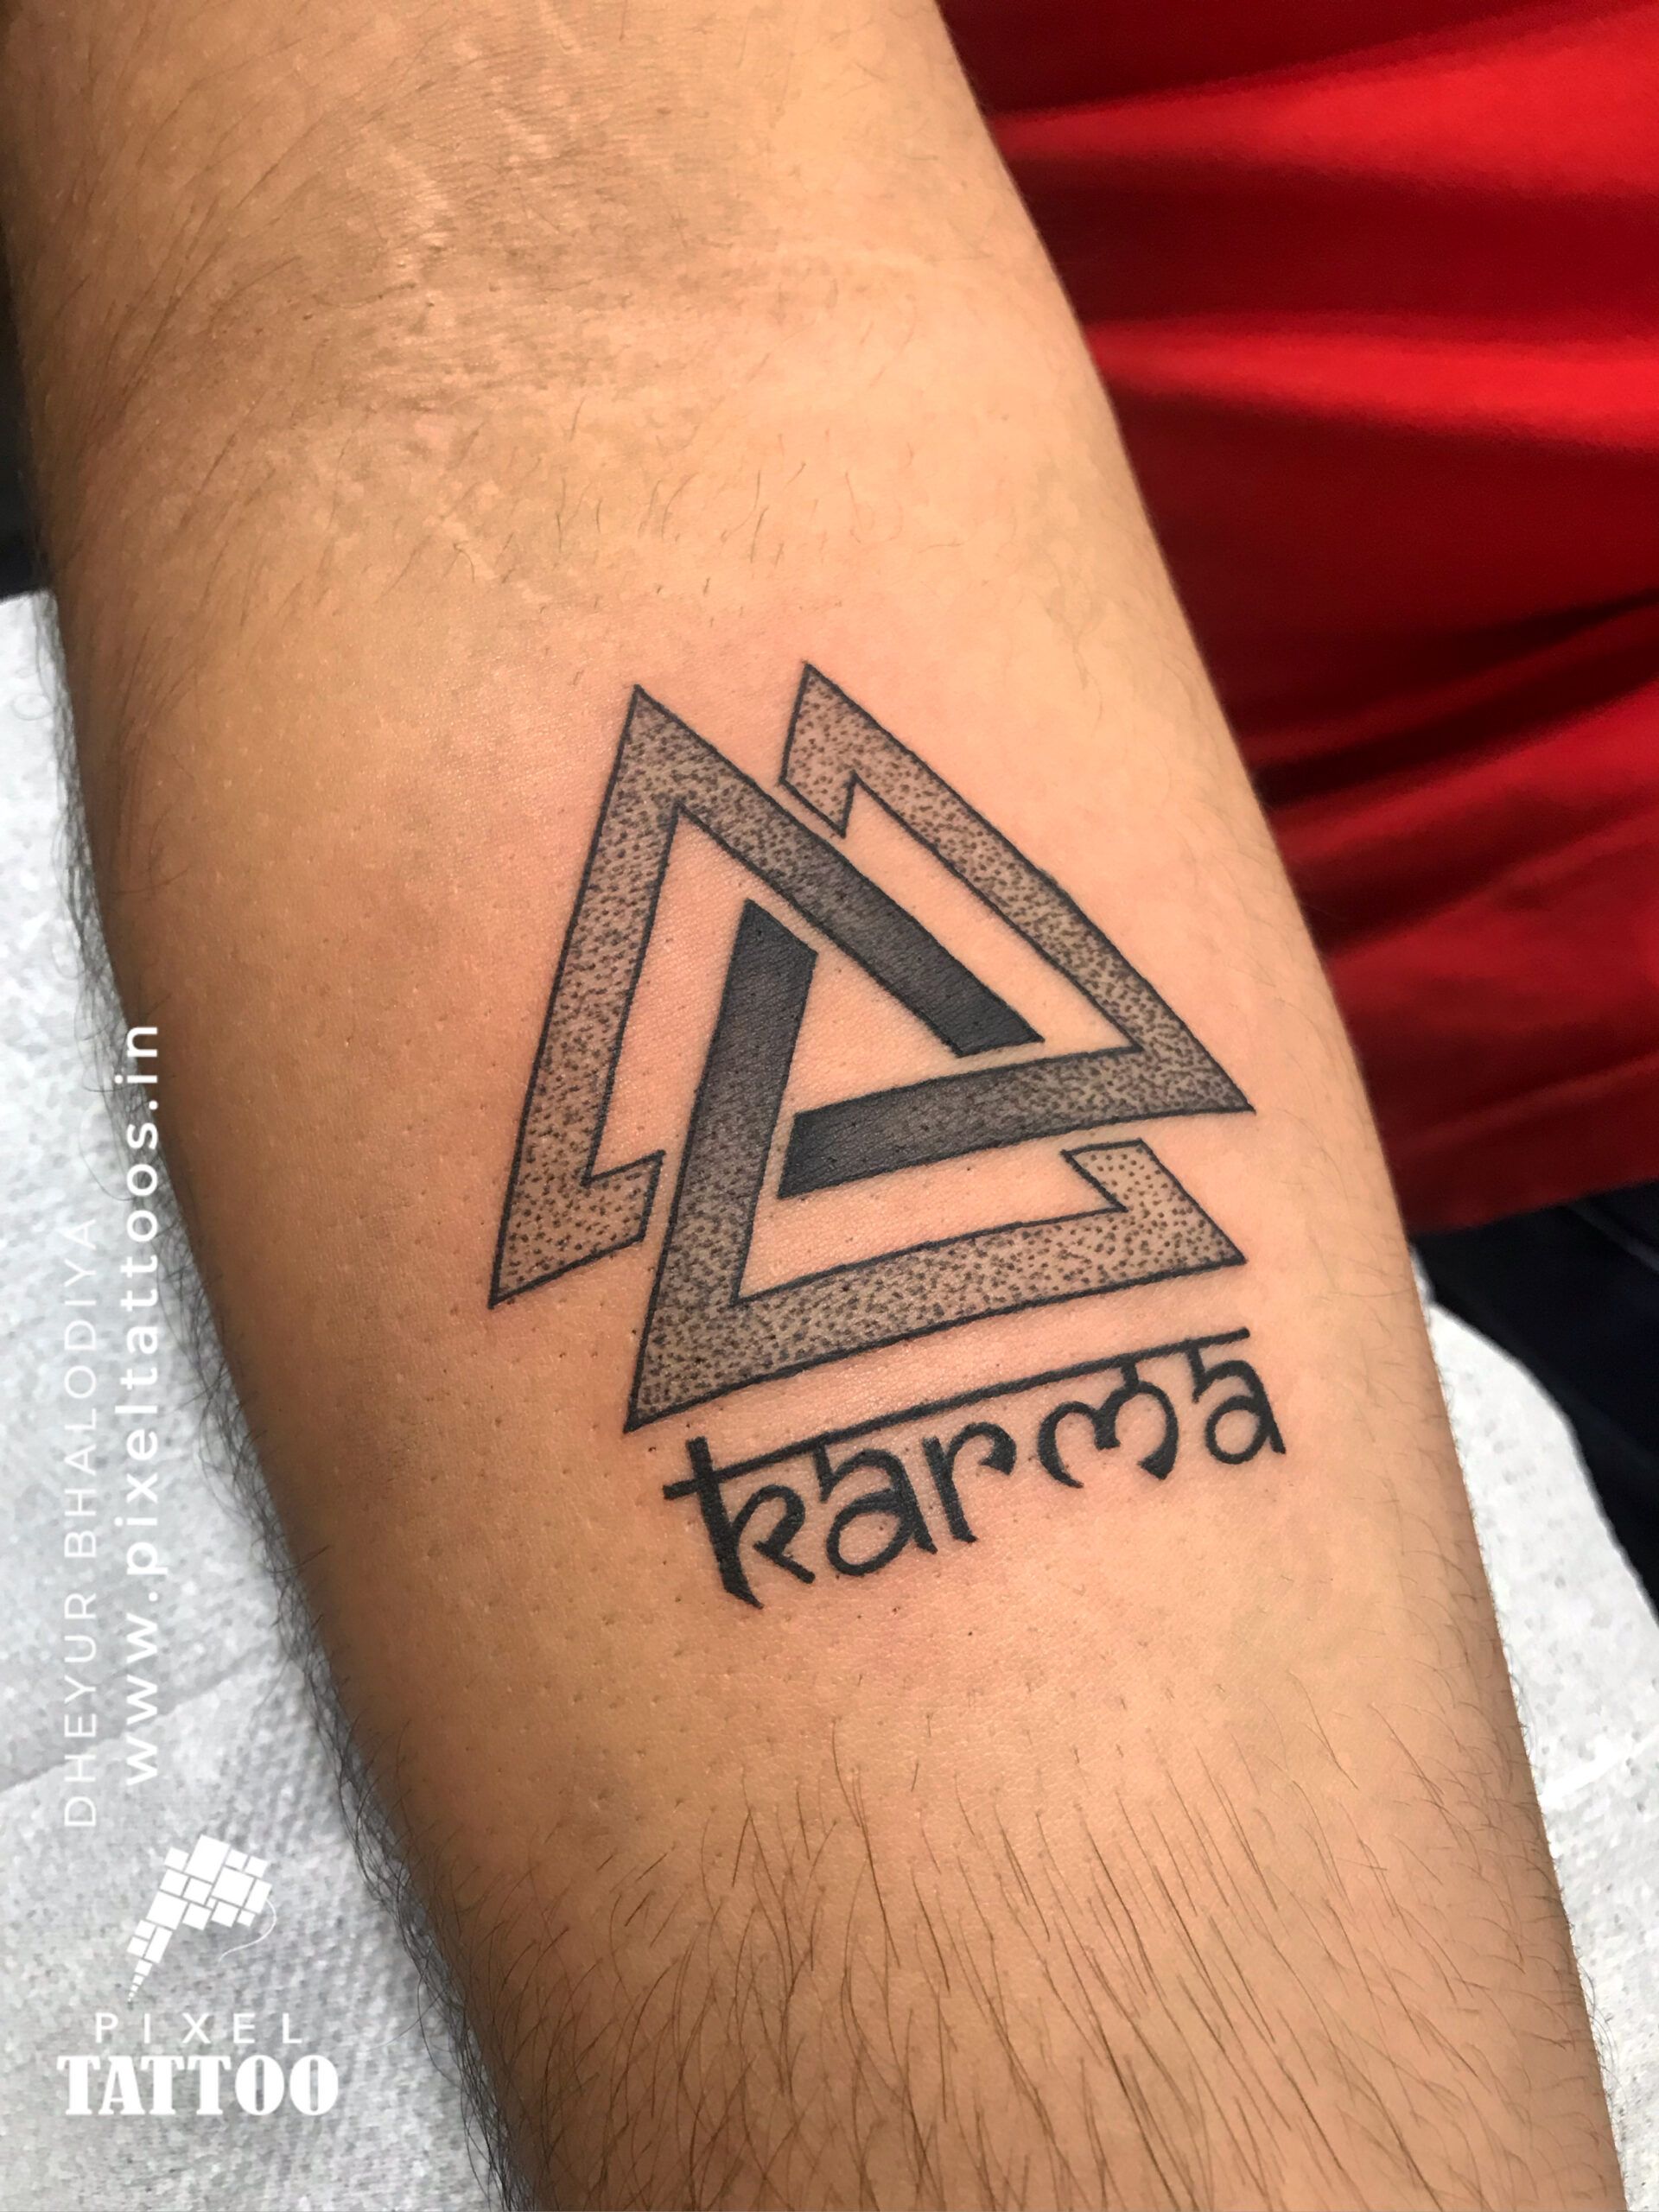 Permanent Tattoos - Pixel Tattoos at Rs 500/square inch in Surat | ID:  20982152662